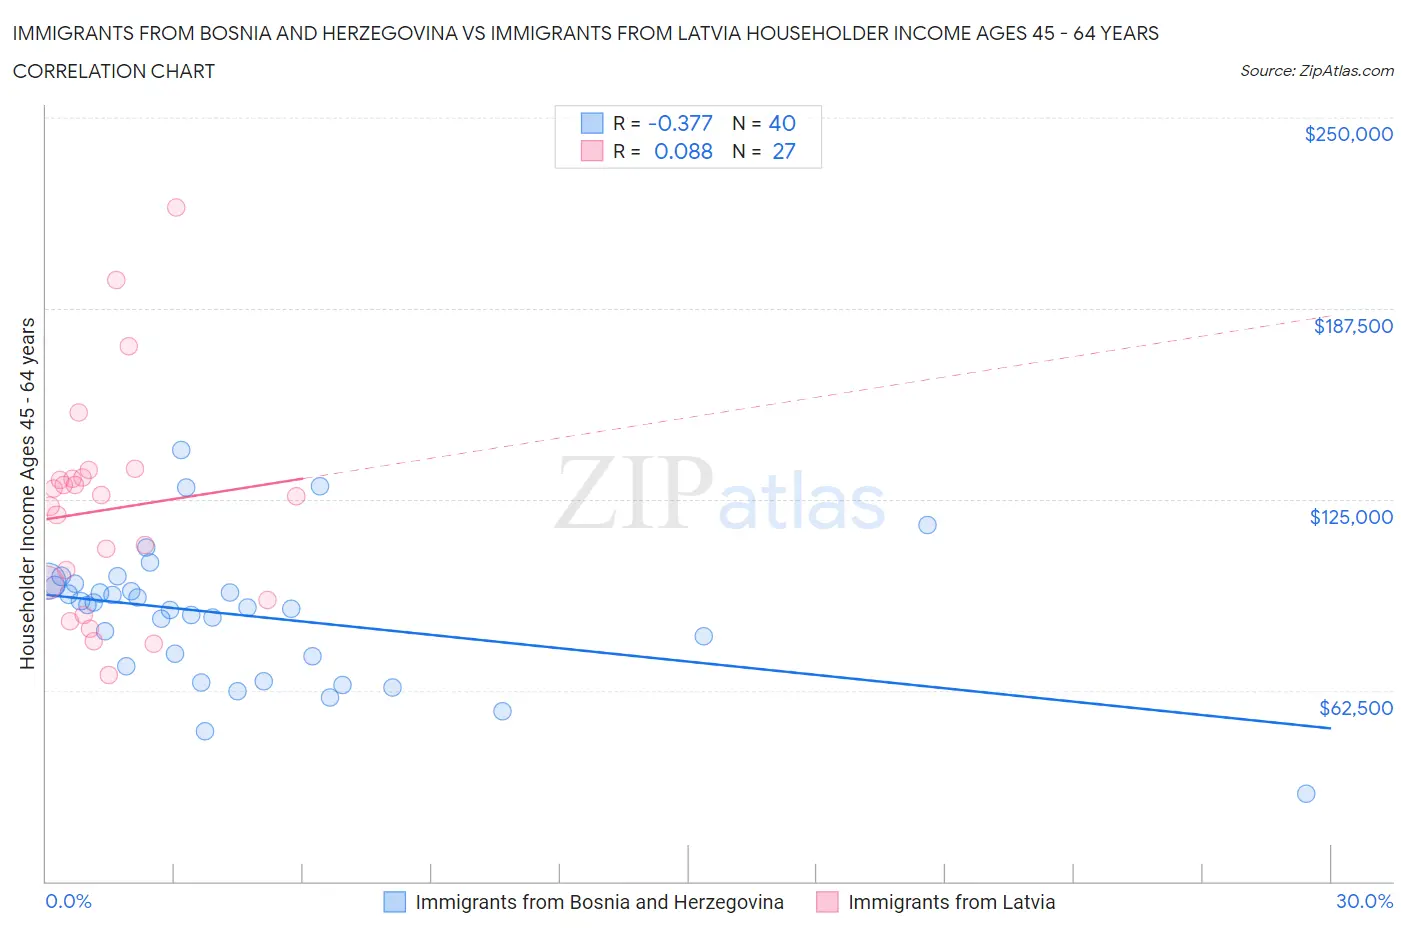 Immigrants from Bosnia and Herzegovina vs Immigrants from Latvia Householder Income Ages 45 - 64 years